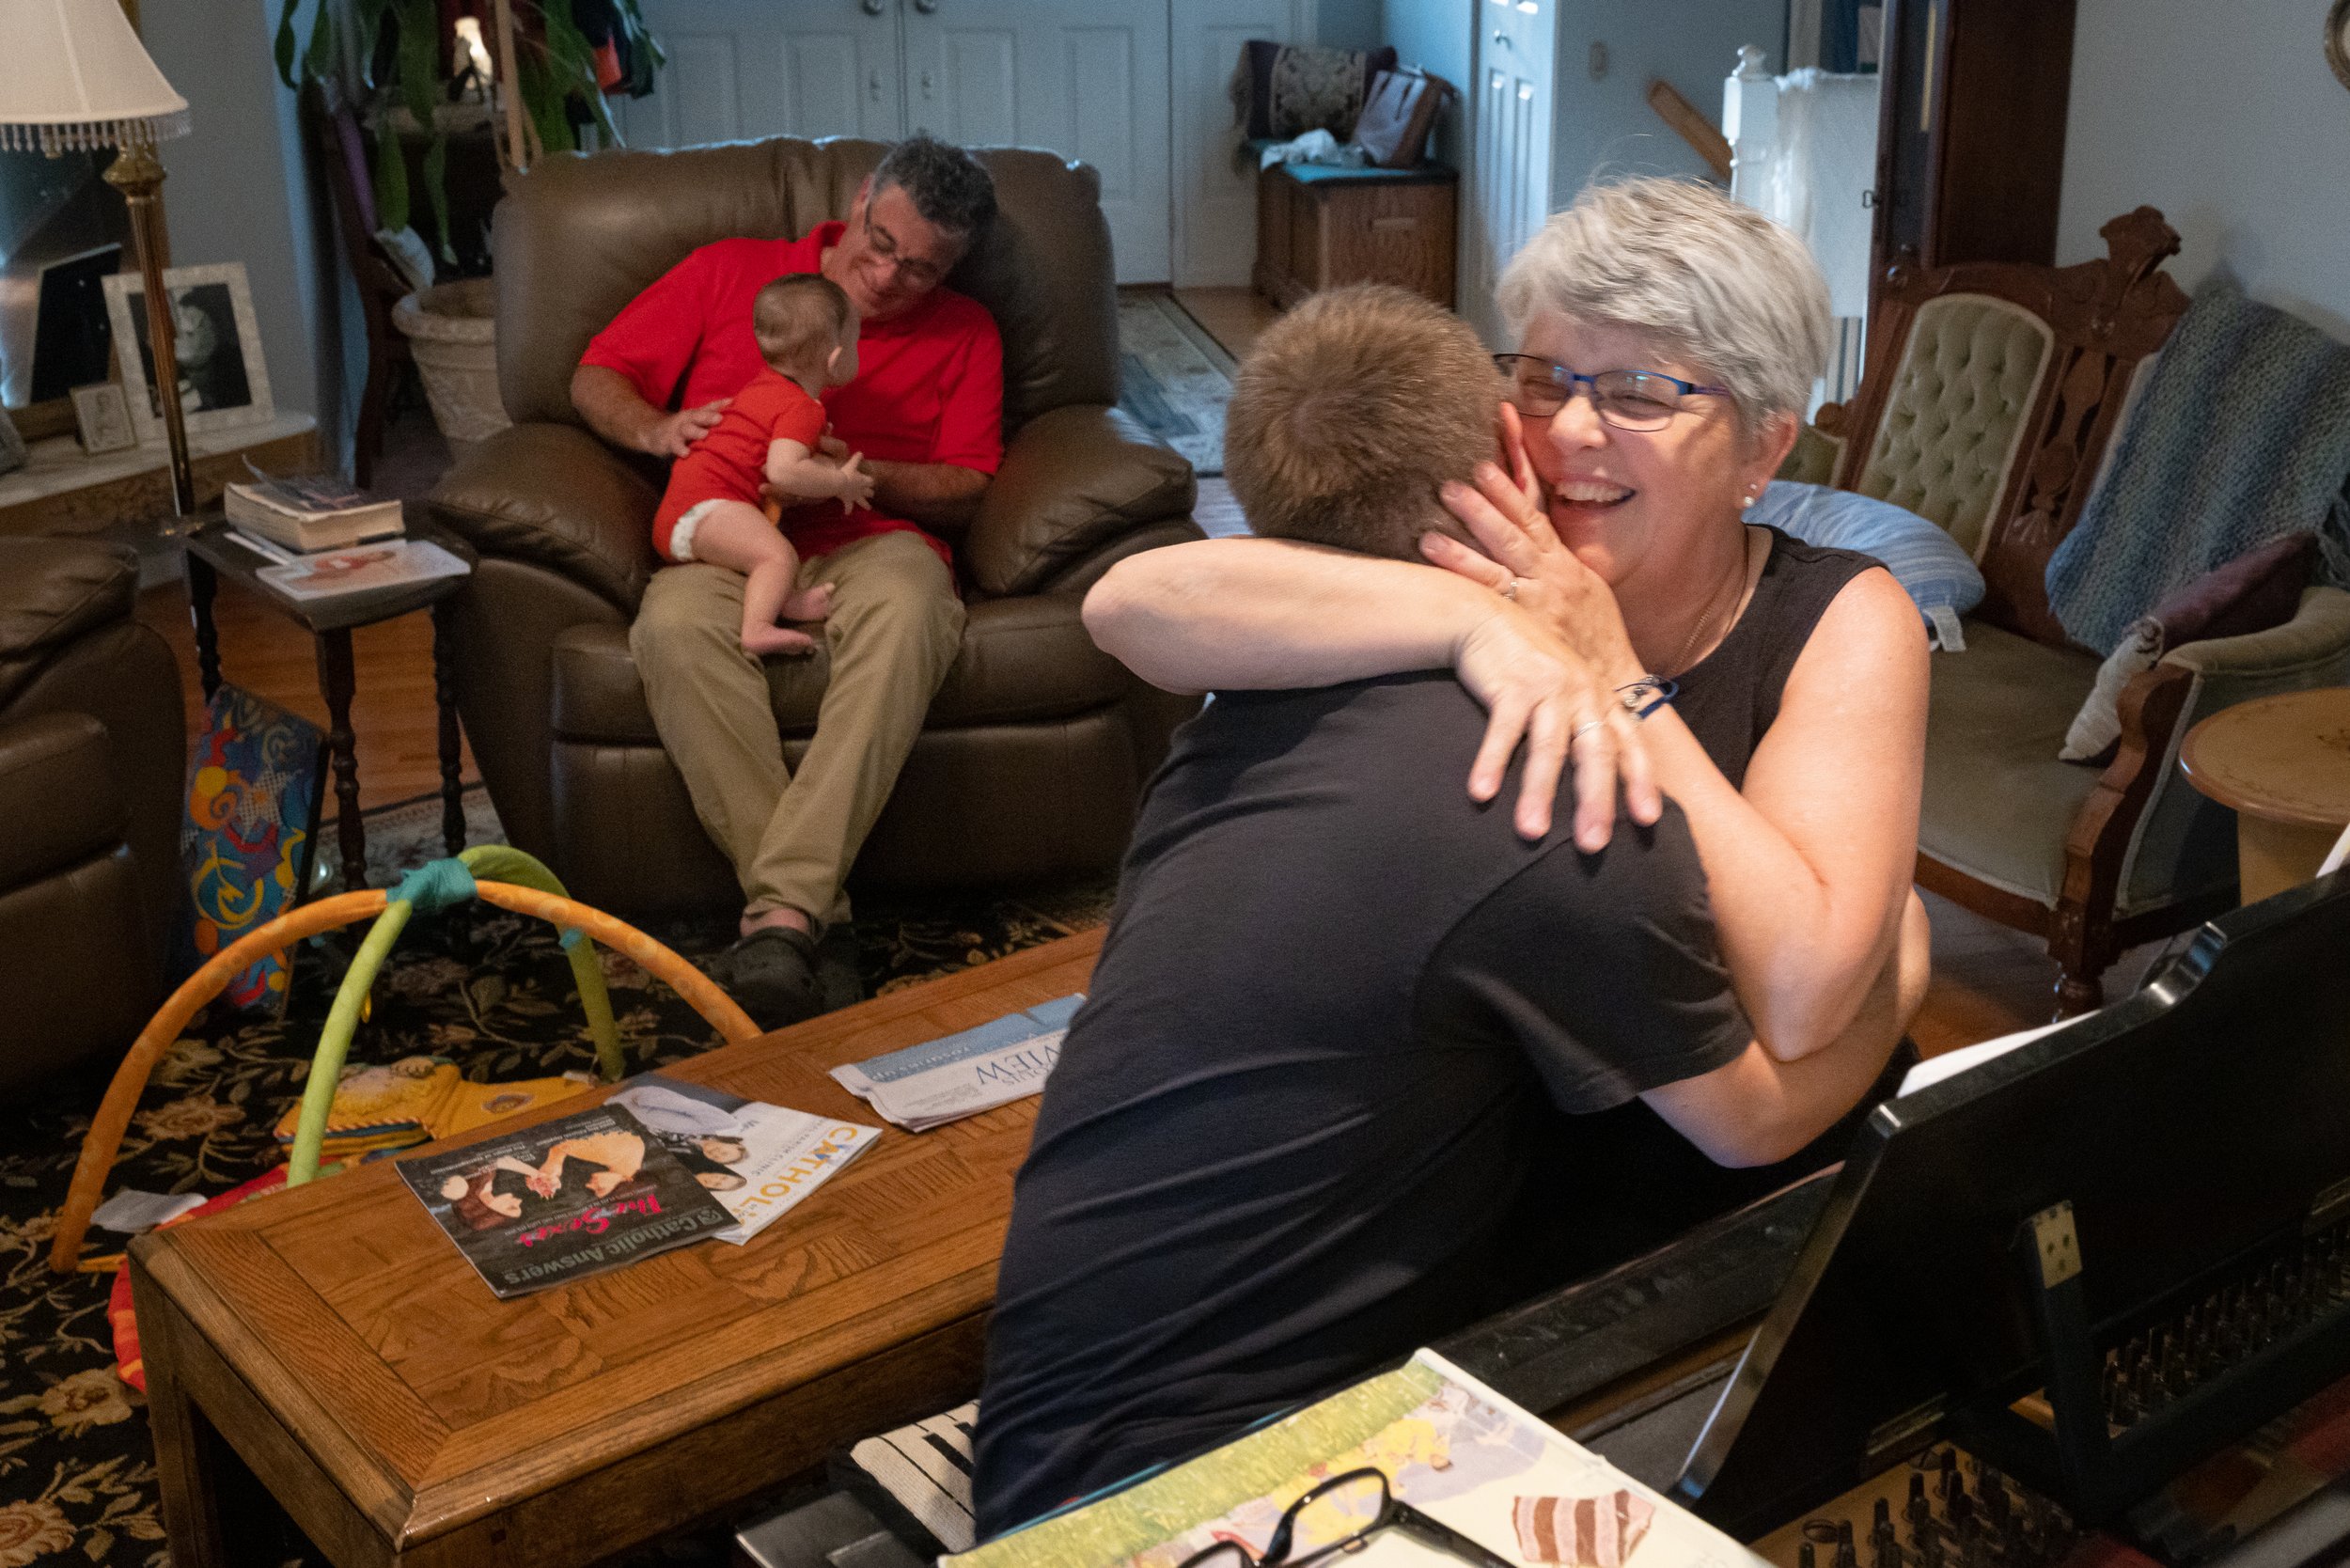  Lori hugged Gabriel after they played a song on the piano near Gabriel's father, Thomas, and his nephew, Ignacio Davila, on June 1 at the Cobb home near St. Charles, Missouri. 